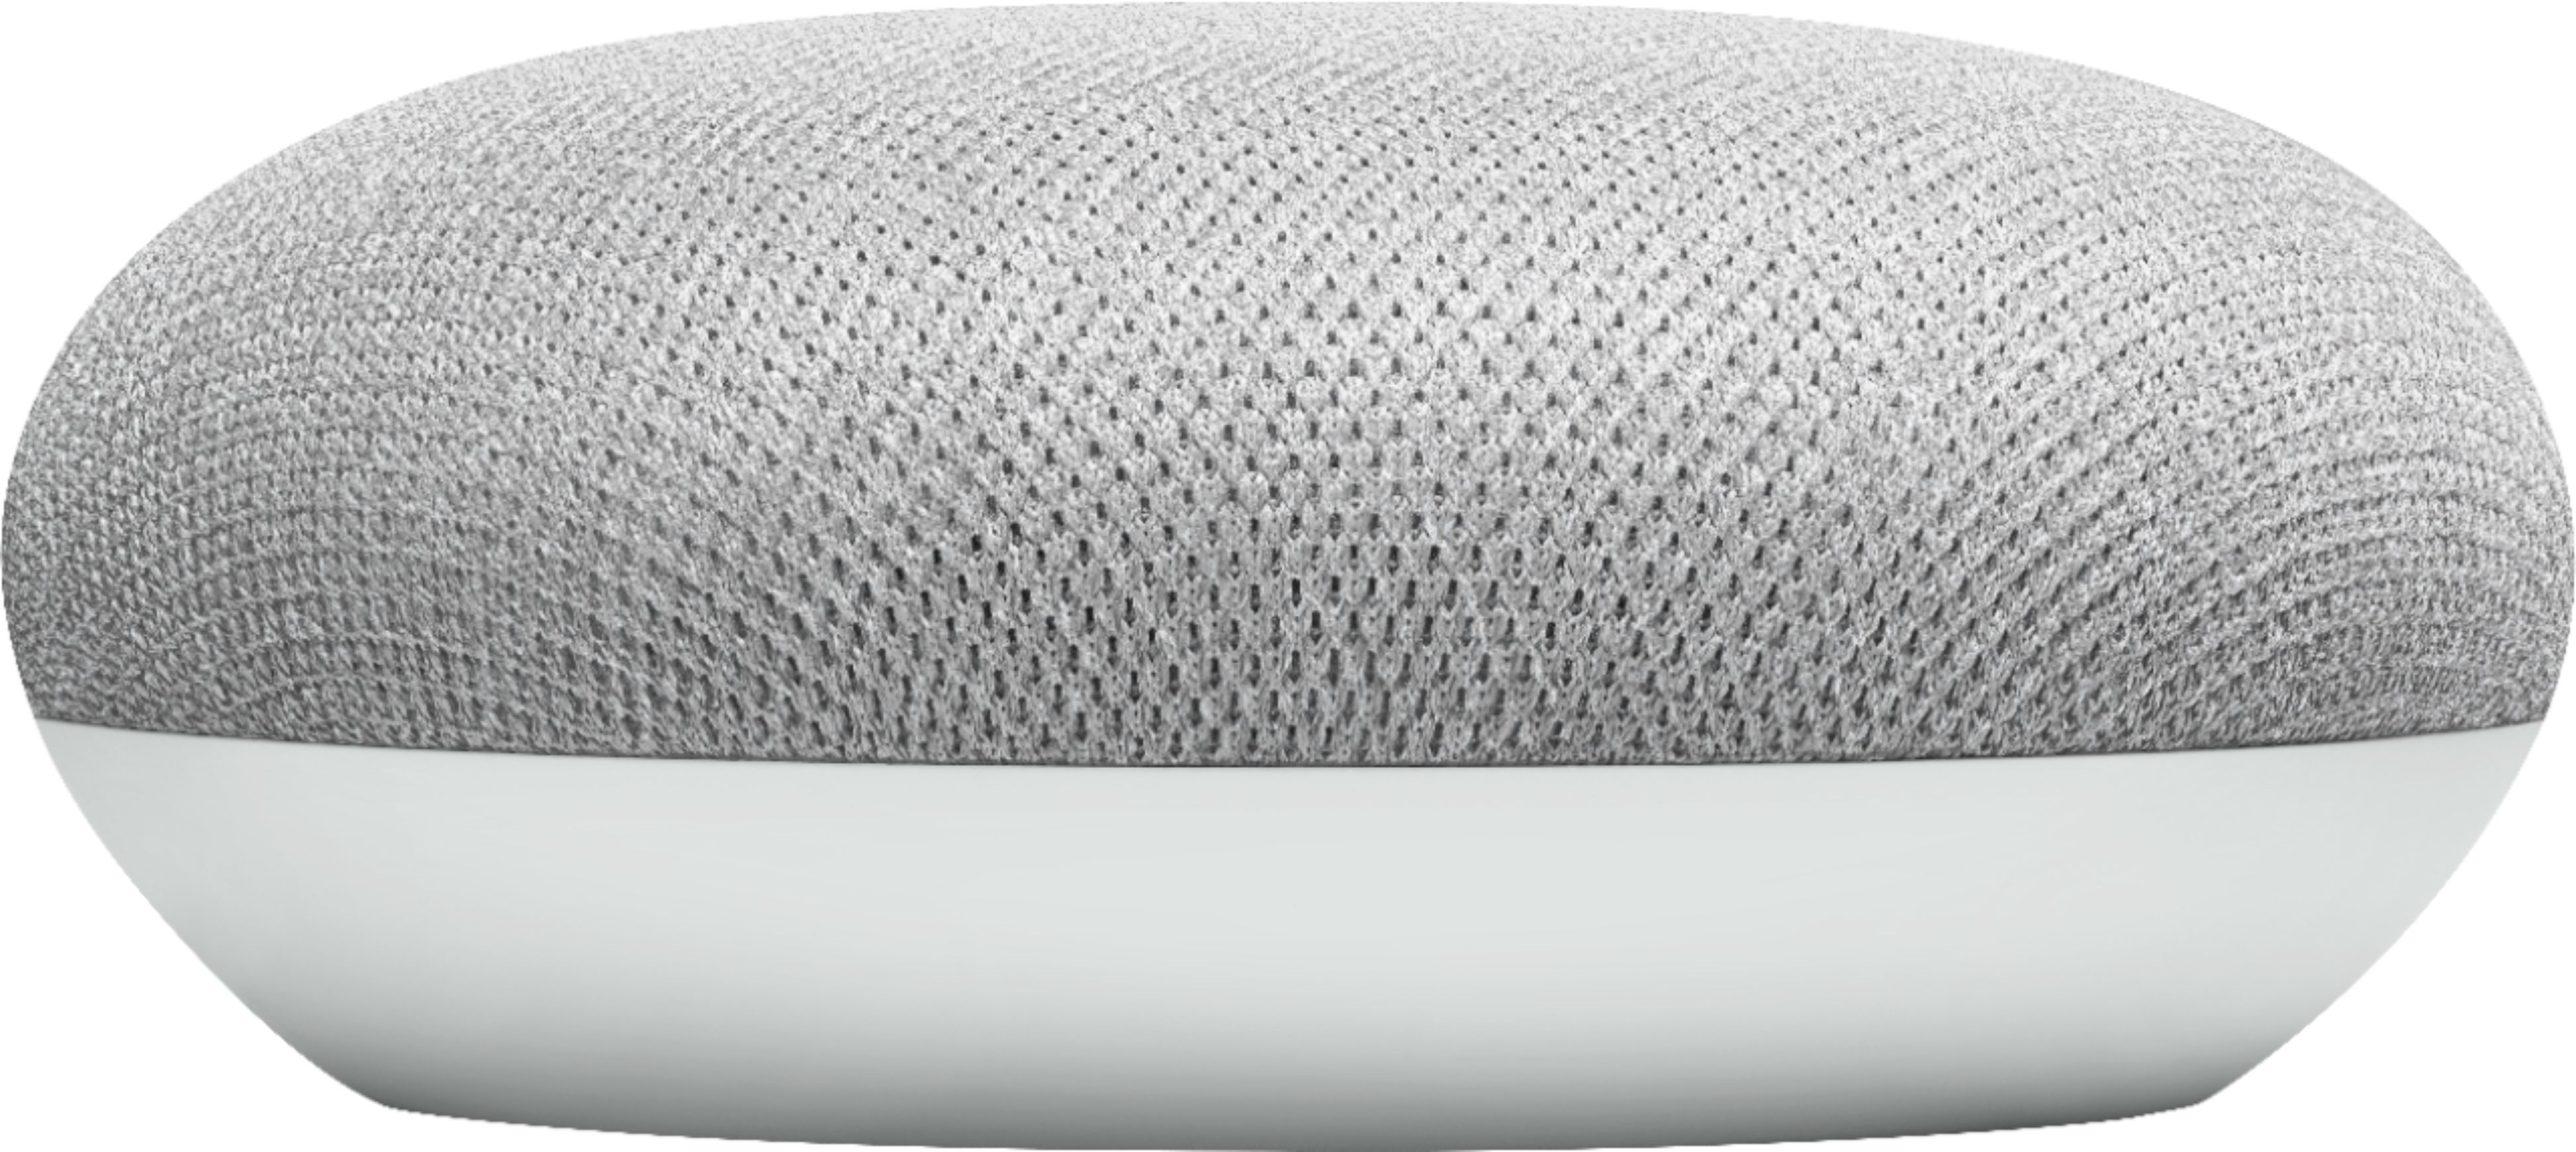 Google Home Mini Smart Assistant Chalk White Voice Activated Speaker Automation 